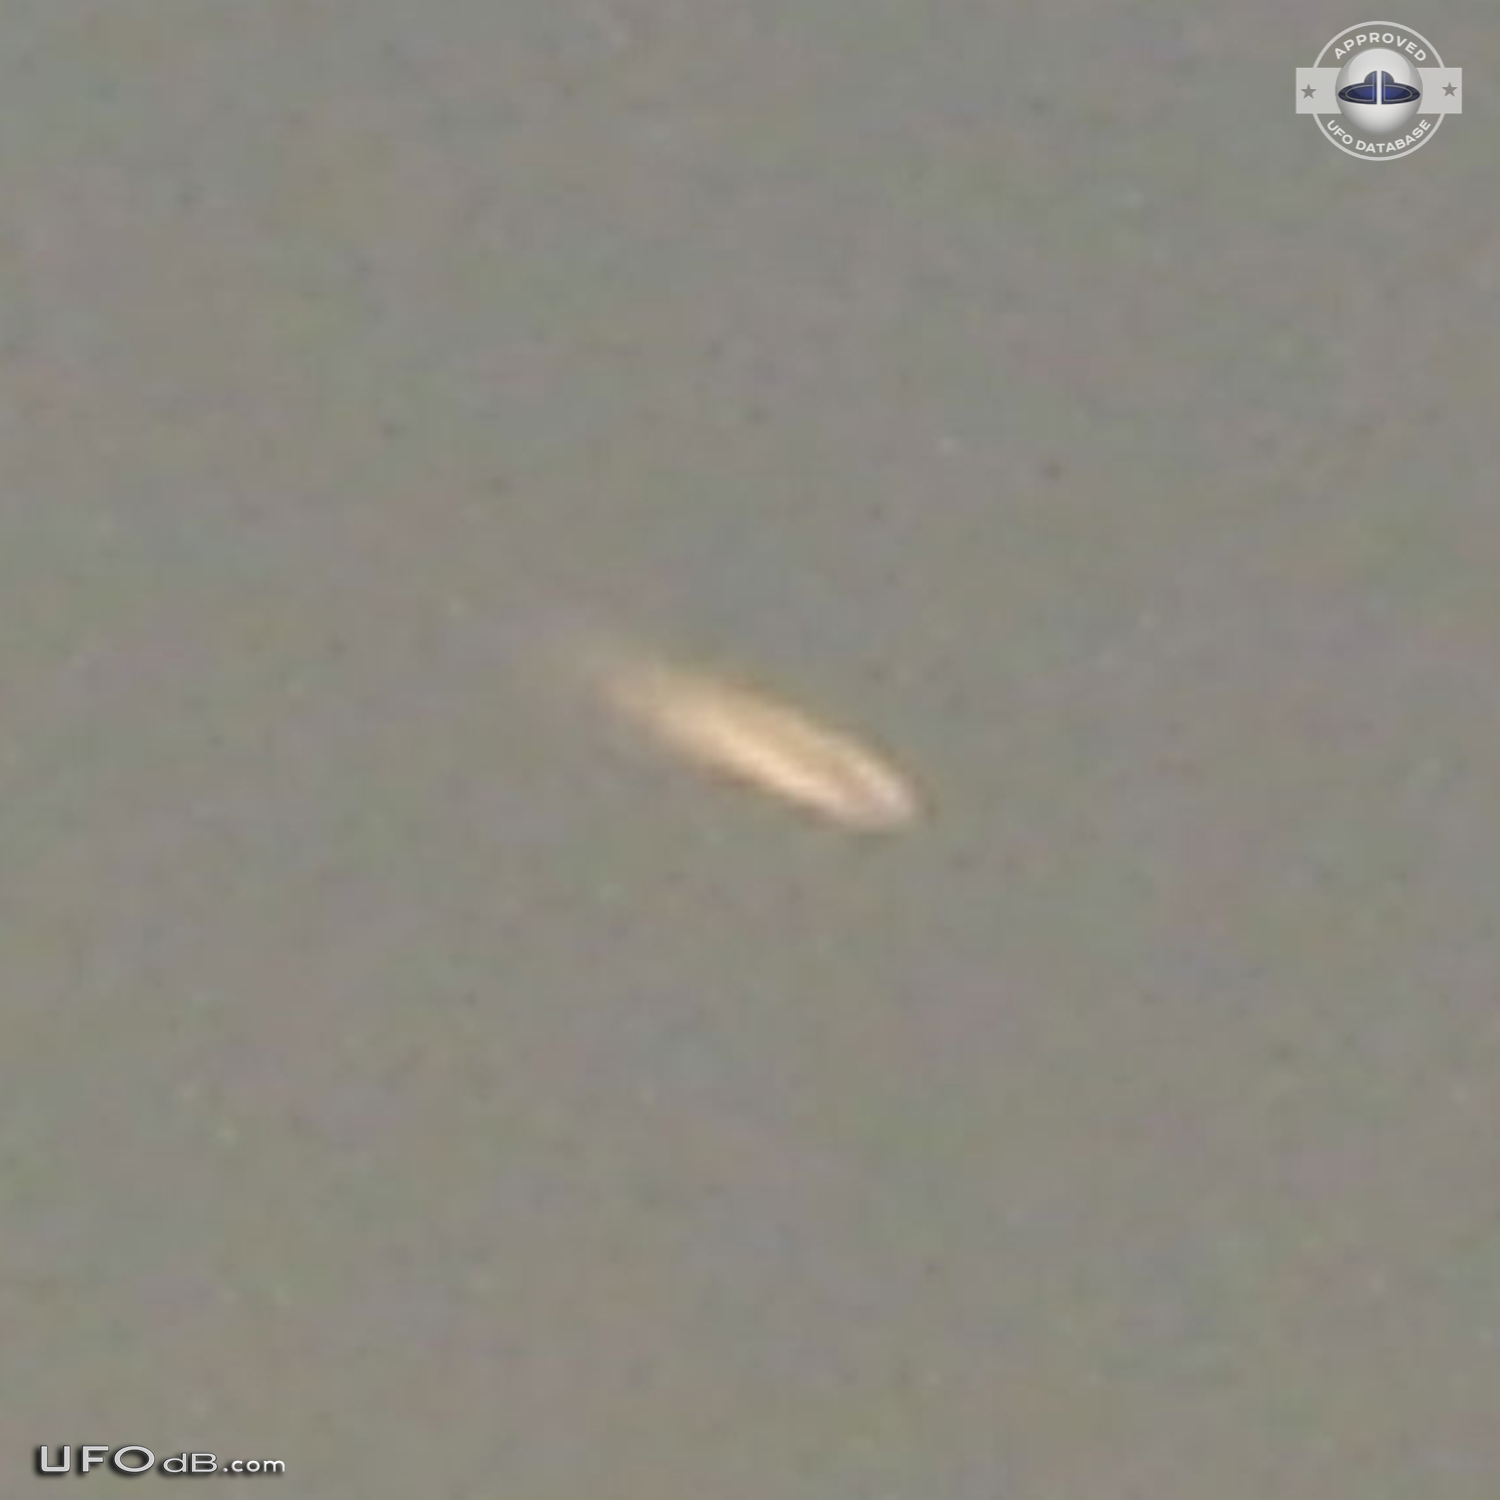 Slow Lonely cloud in clear sky is a UFO in Ostrobothnia Finland 2010 UFO Picture #529-3